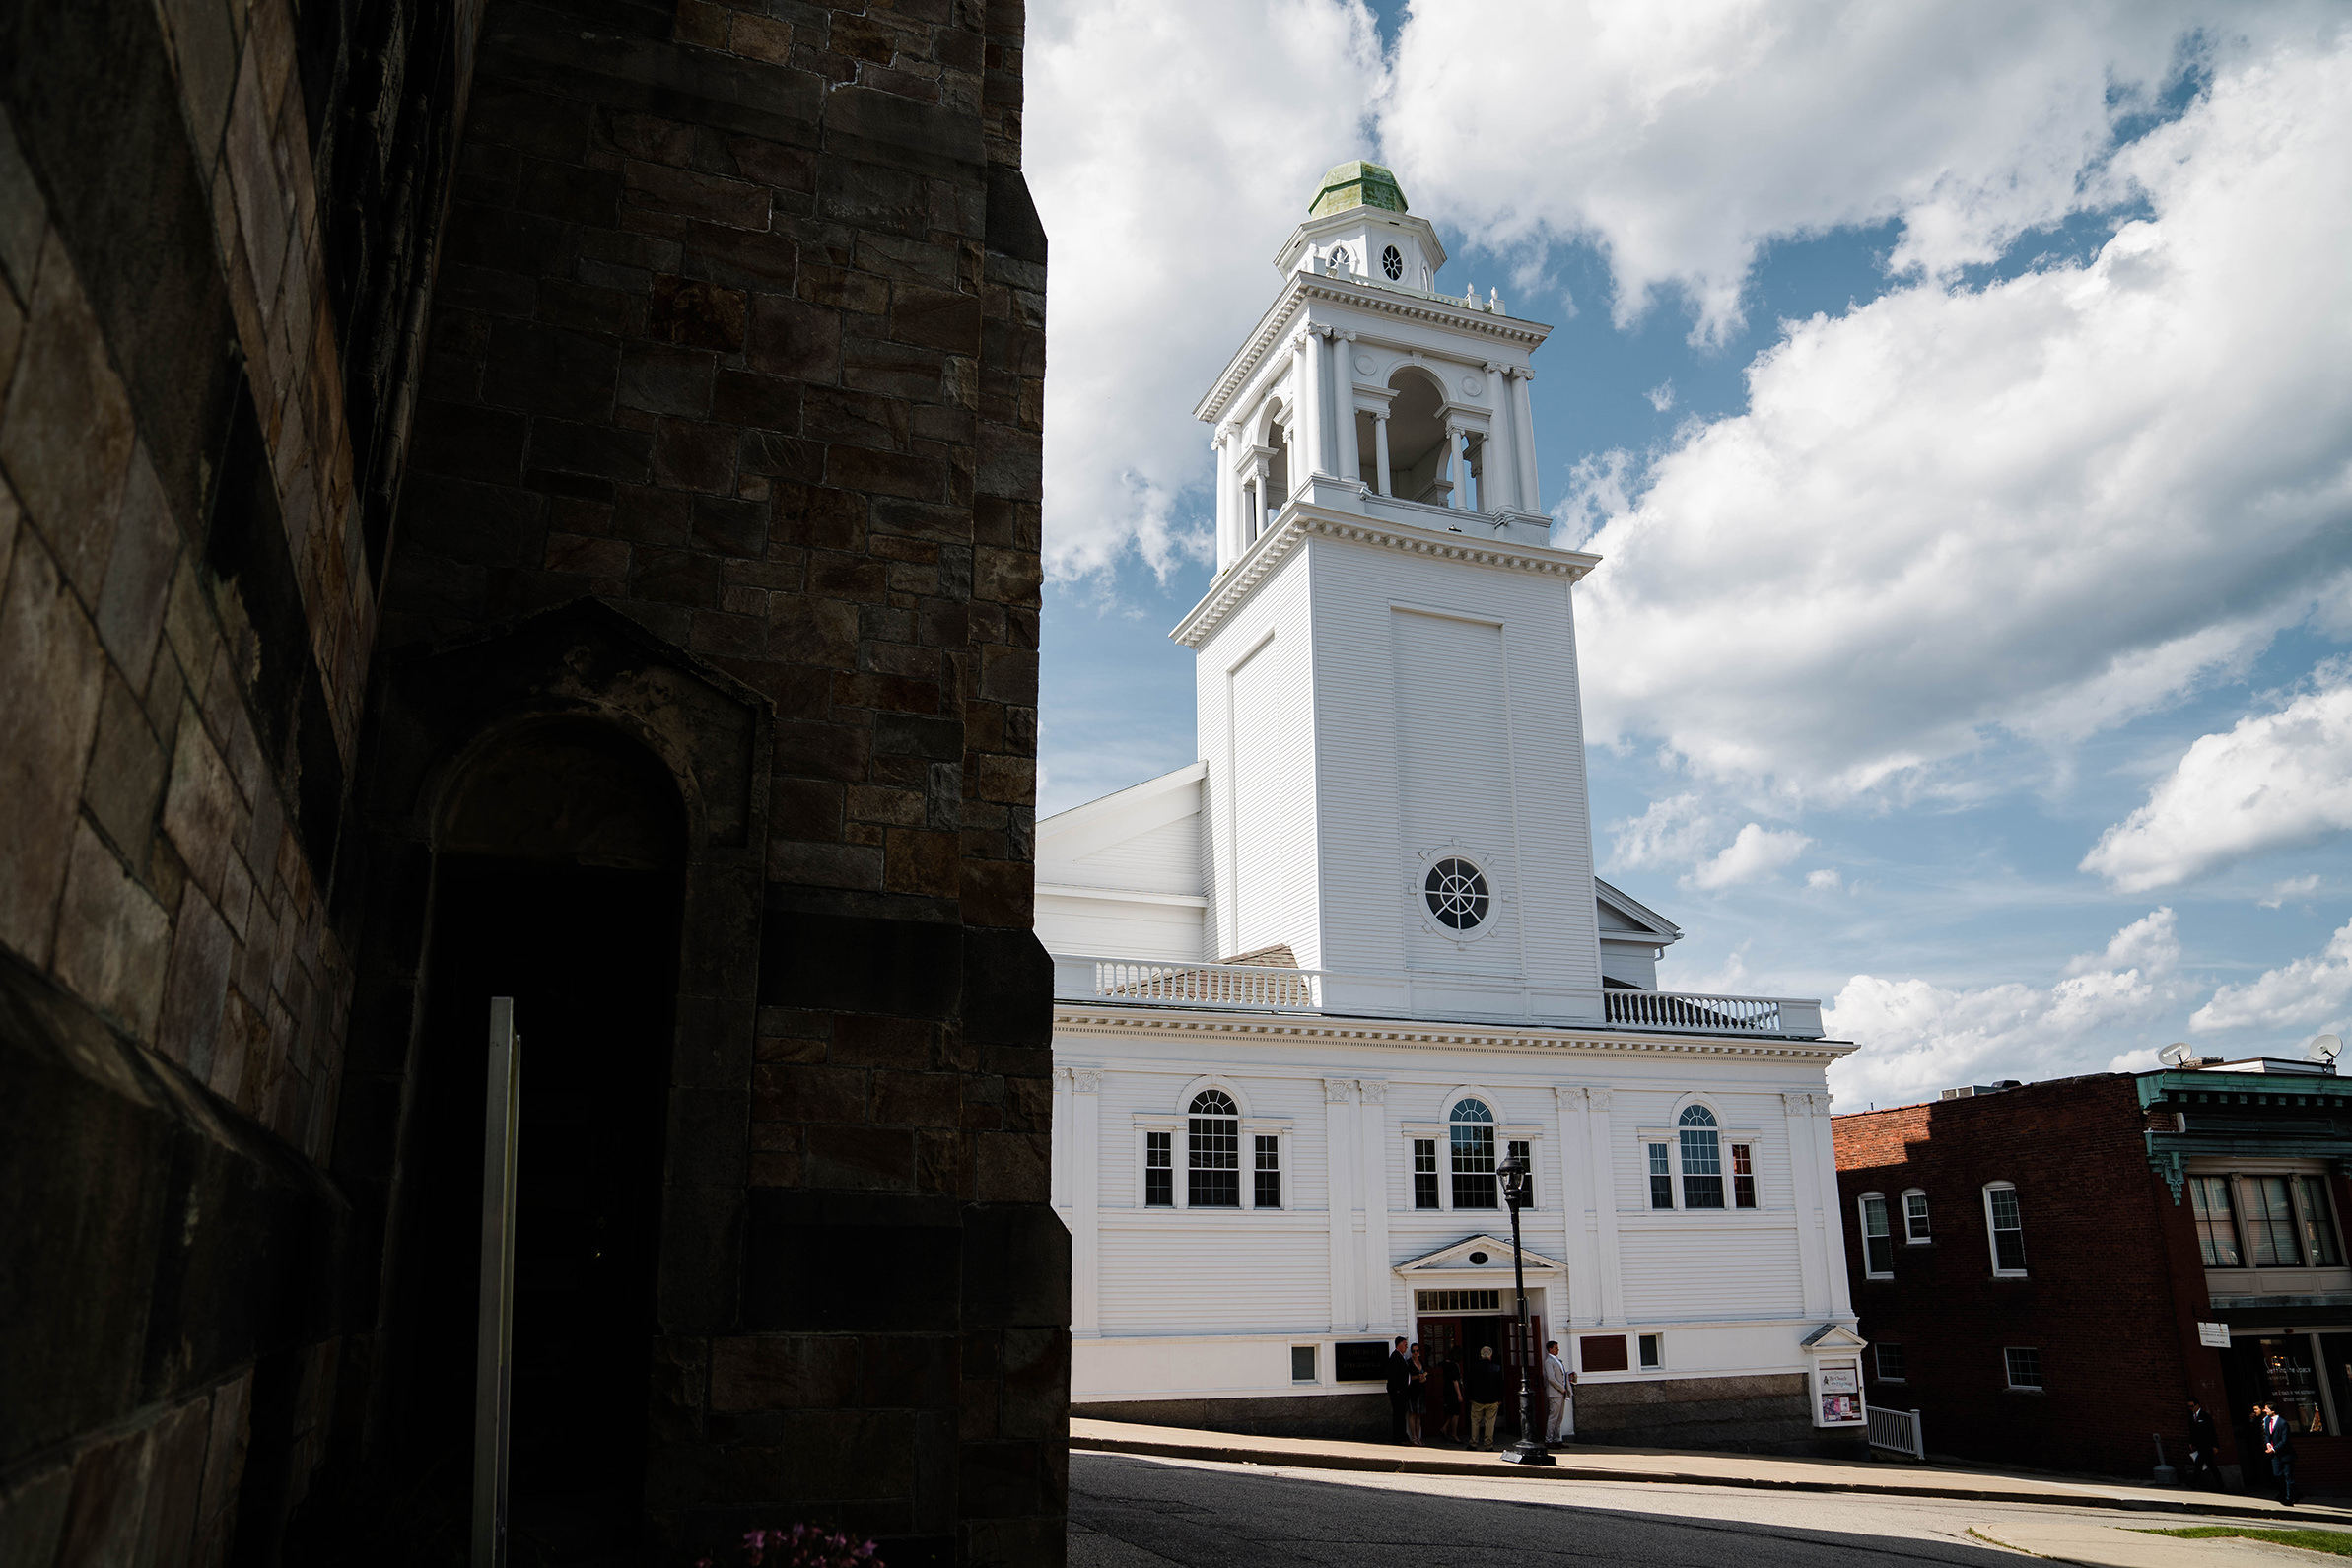 A documentary photograph featured in the best of wedding photography of 2019 showing a church in Plymouth